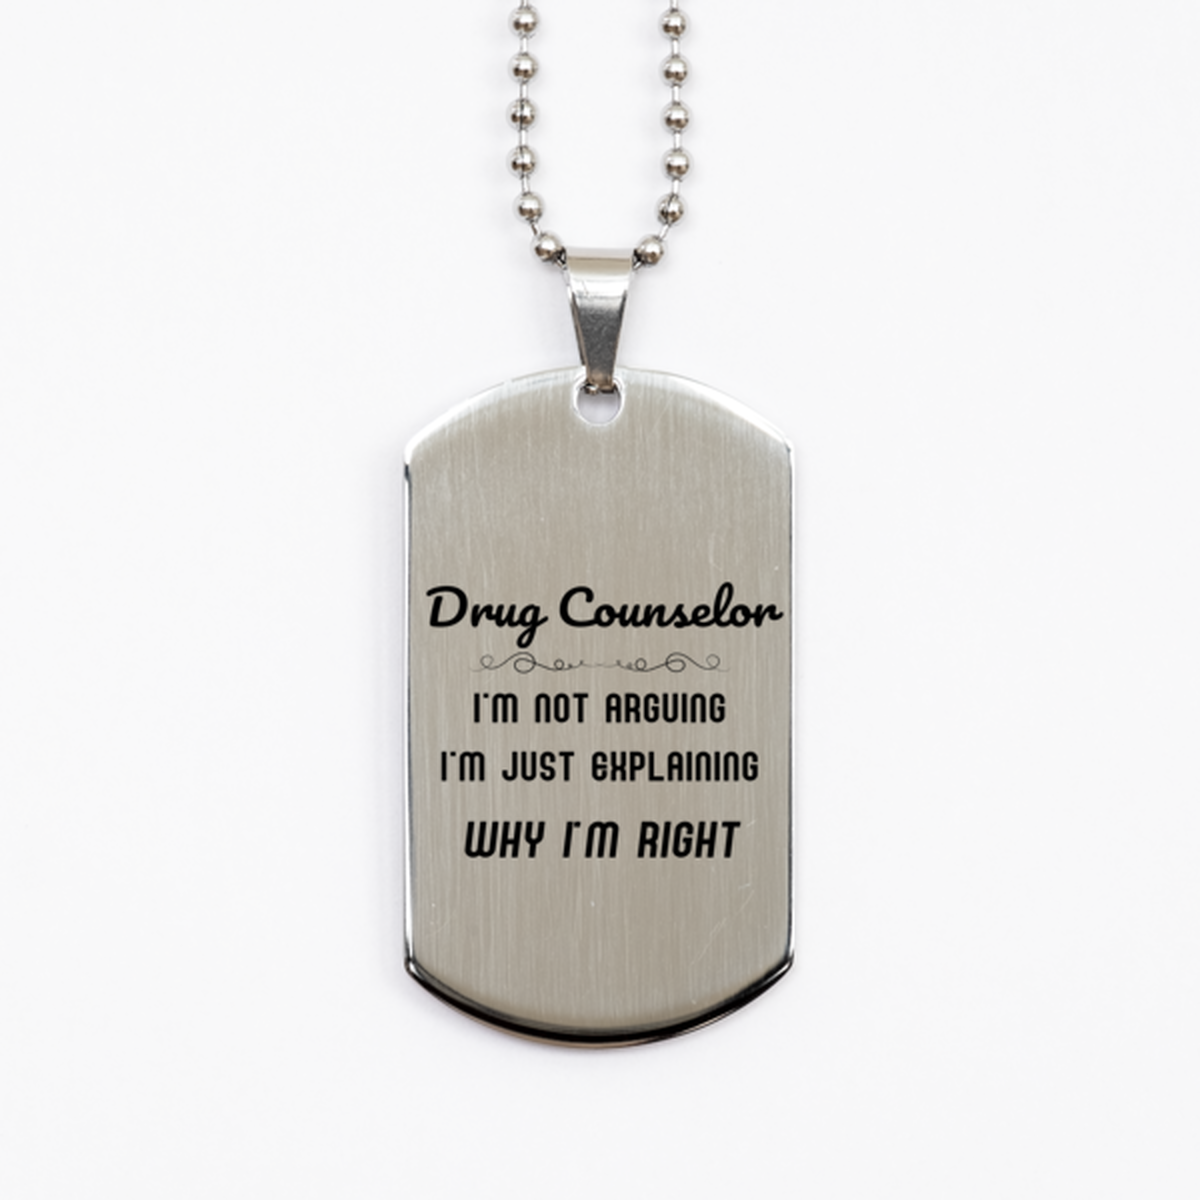 Drug Counselor I'm not Arguing. I'm Just Explaining Why I'm RIGHT Silver Dog Tag, Funny Saying Quote Drug Counselor Gifts For Drug Counselor Graduation Birthday Christmas Gifts for Men Women Coworker